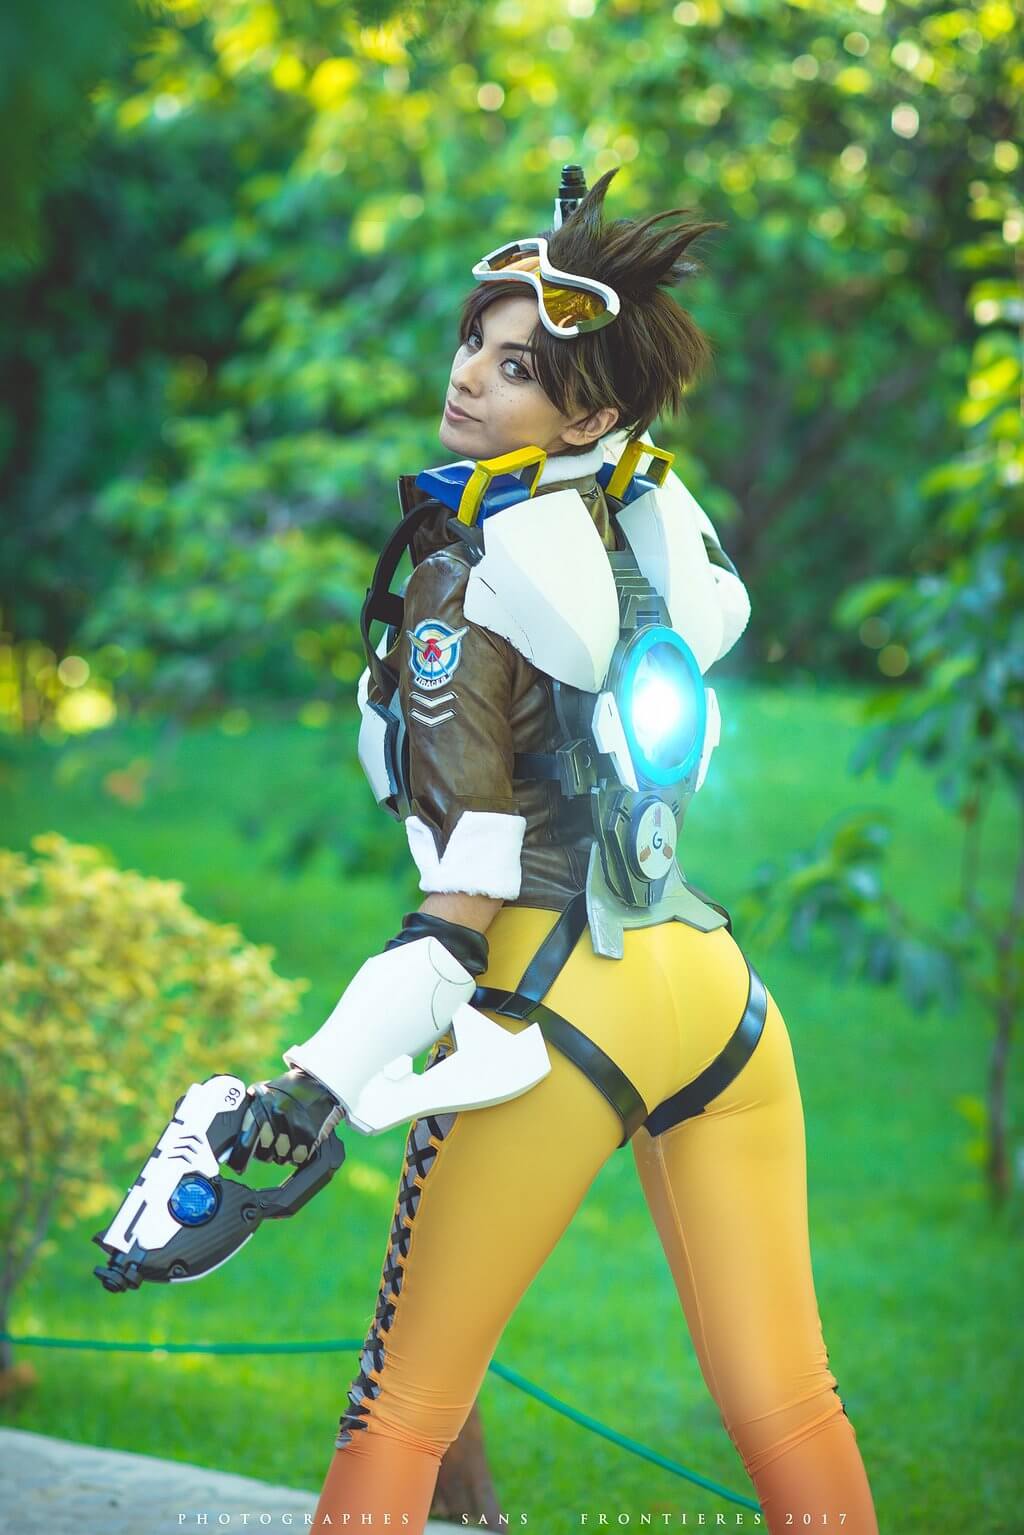 49 Big Butt Pictures Of Tracer Which Will Make Your Mouth Water | Best Of Comic Books